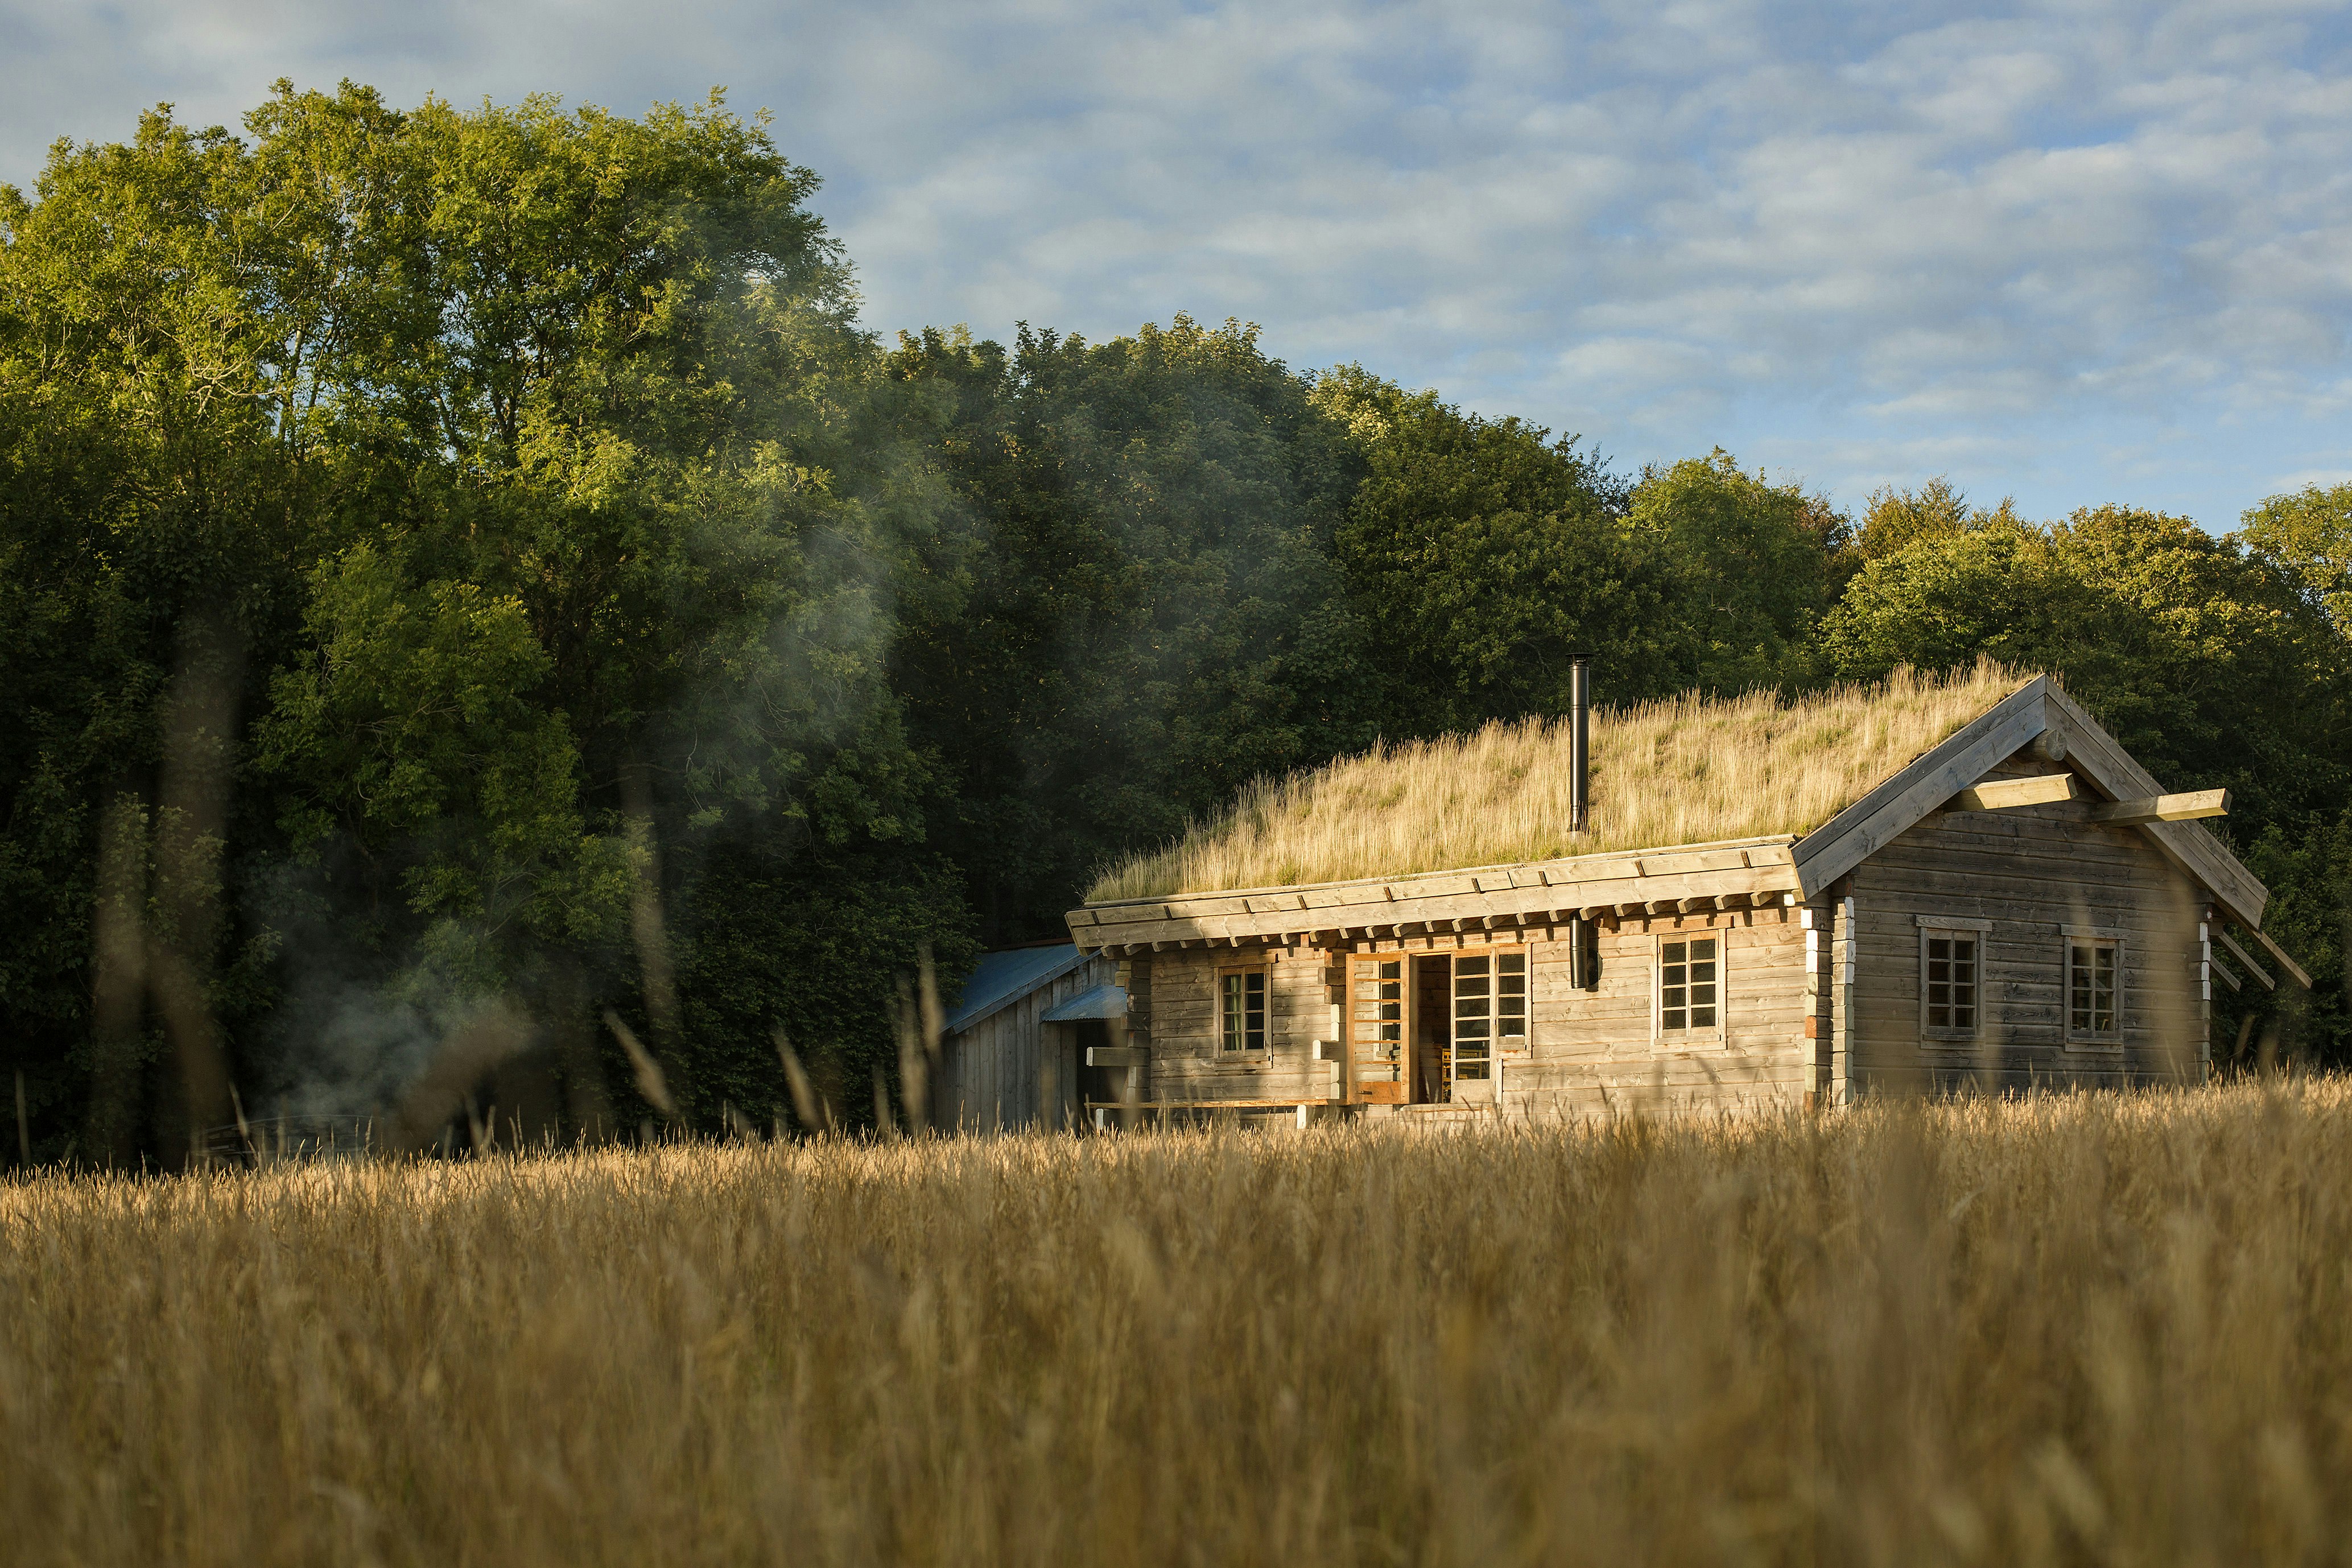 A wooden cabin with a grass roof stands in a field of wheat. The blonde wood of the cabin stands in contrast to the rich green of the trees behind it. 